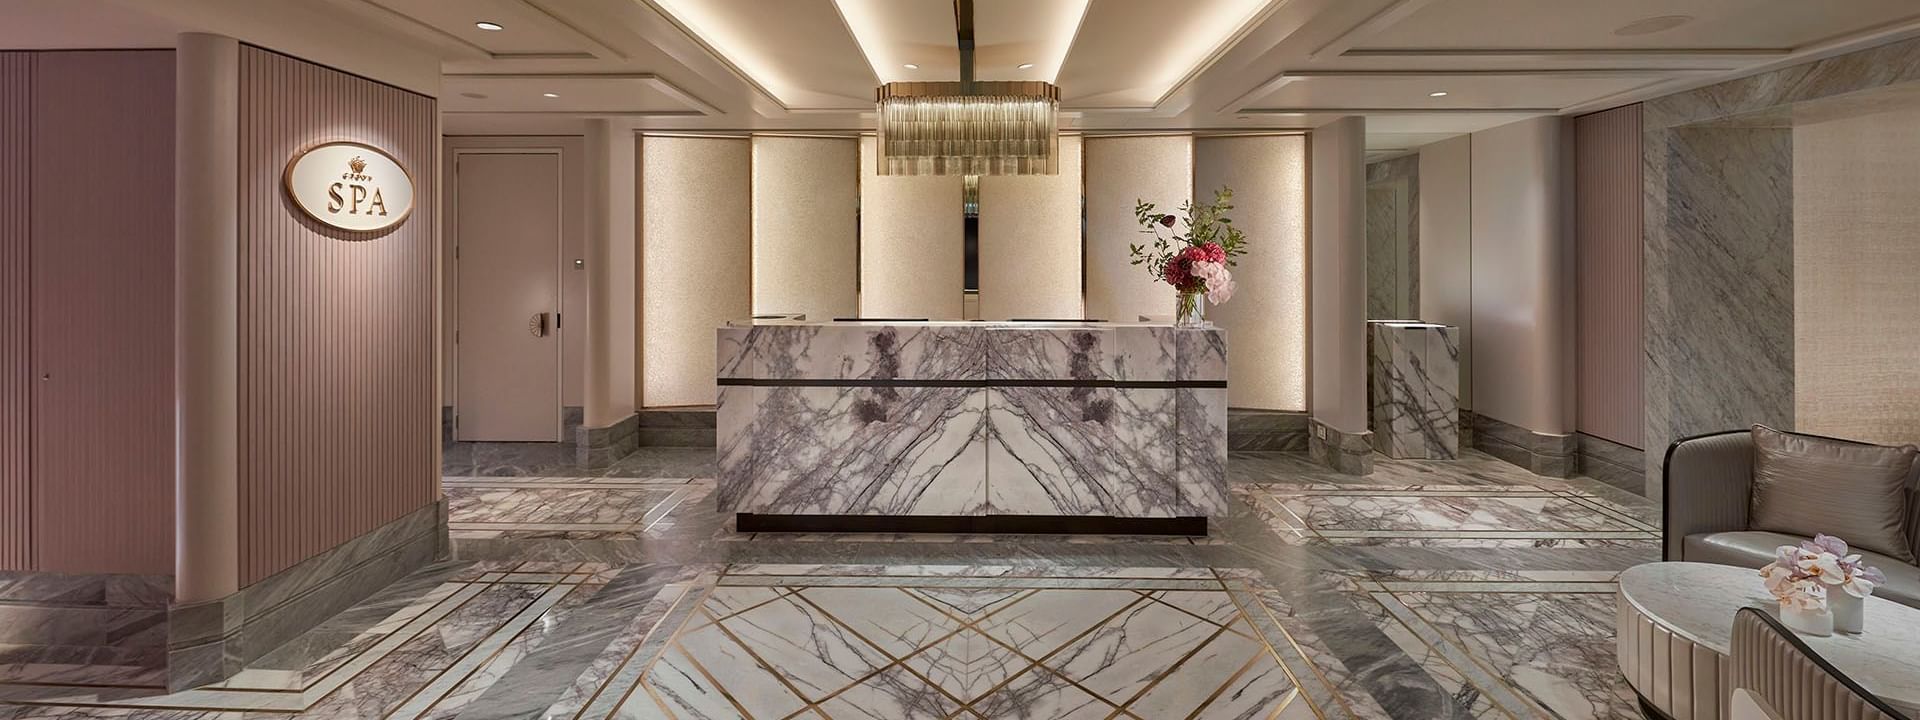 Reception area & lobby in crown spa at Crown Hotels Group